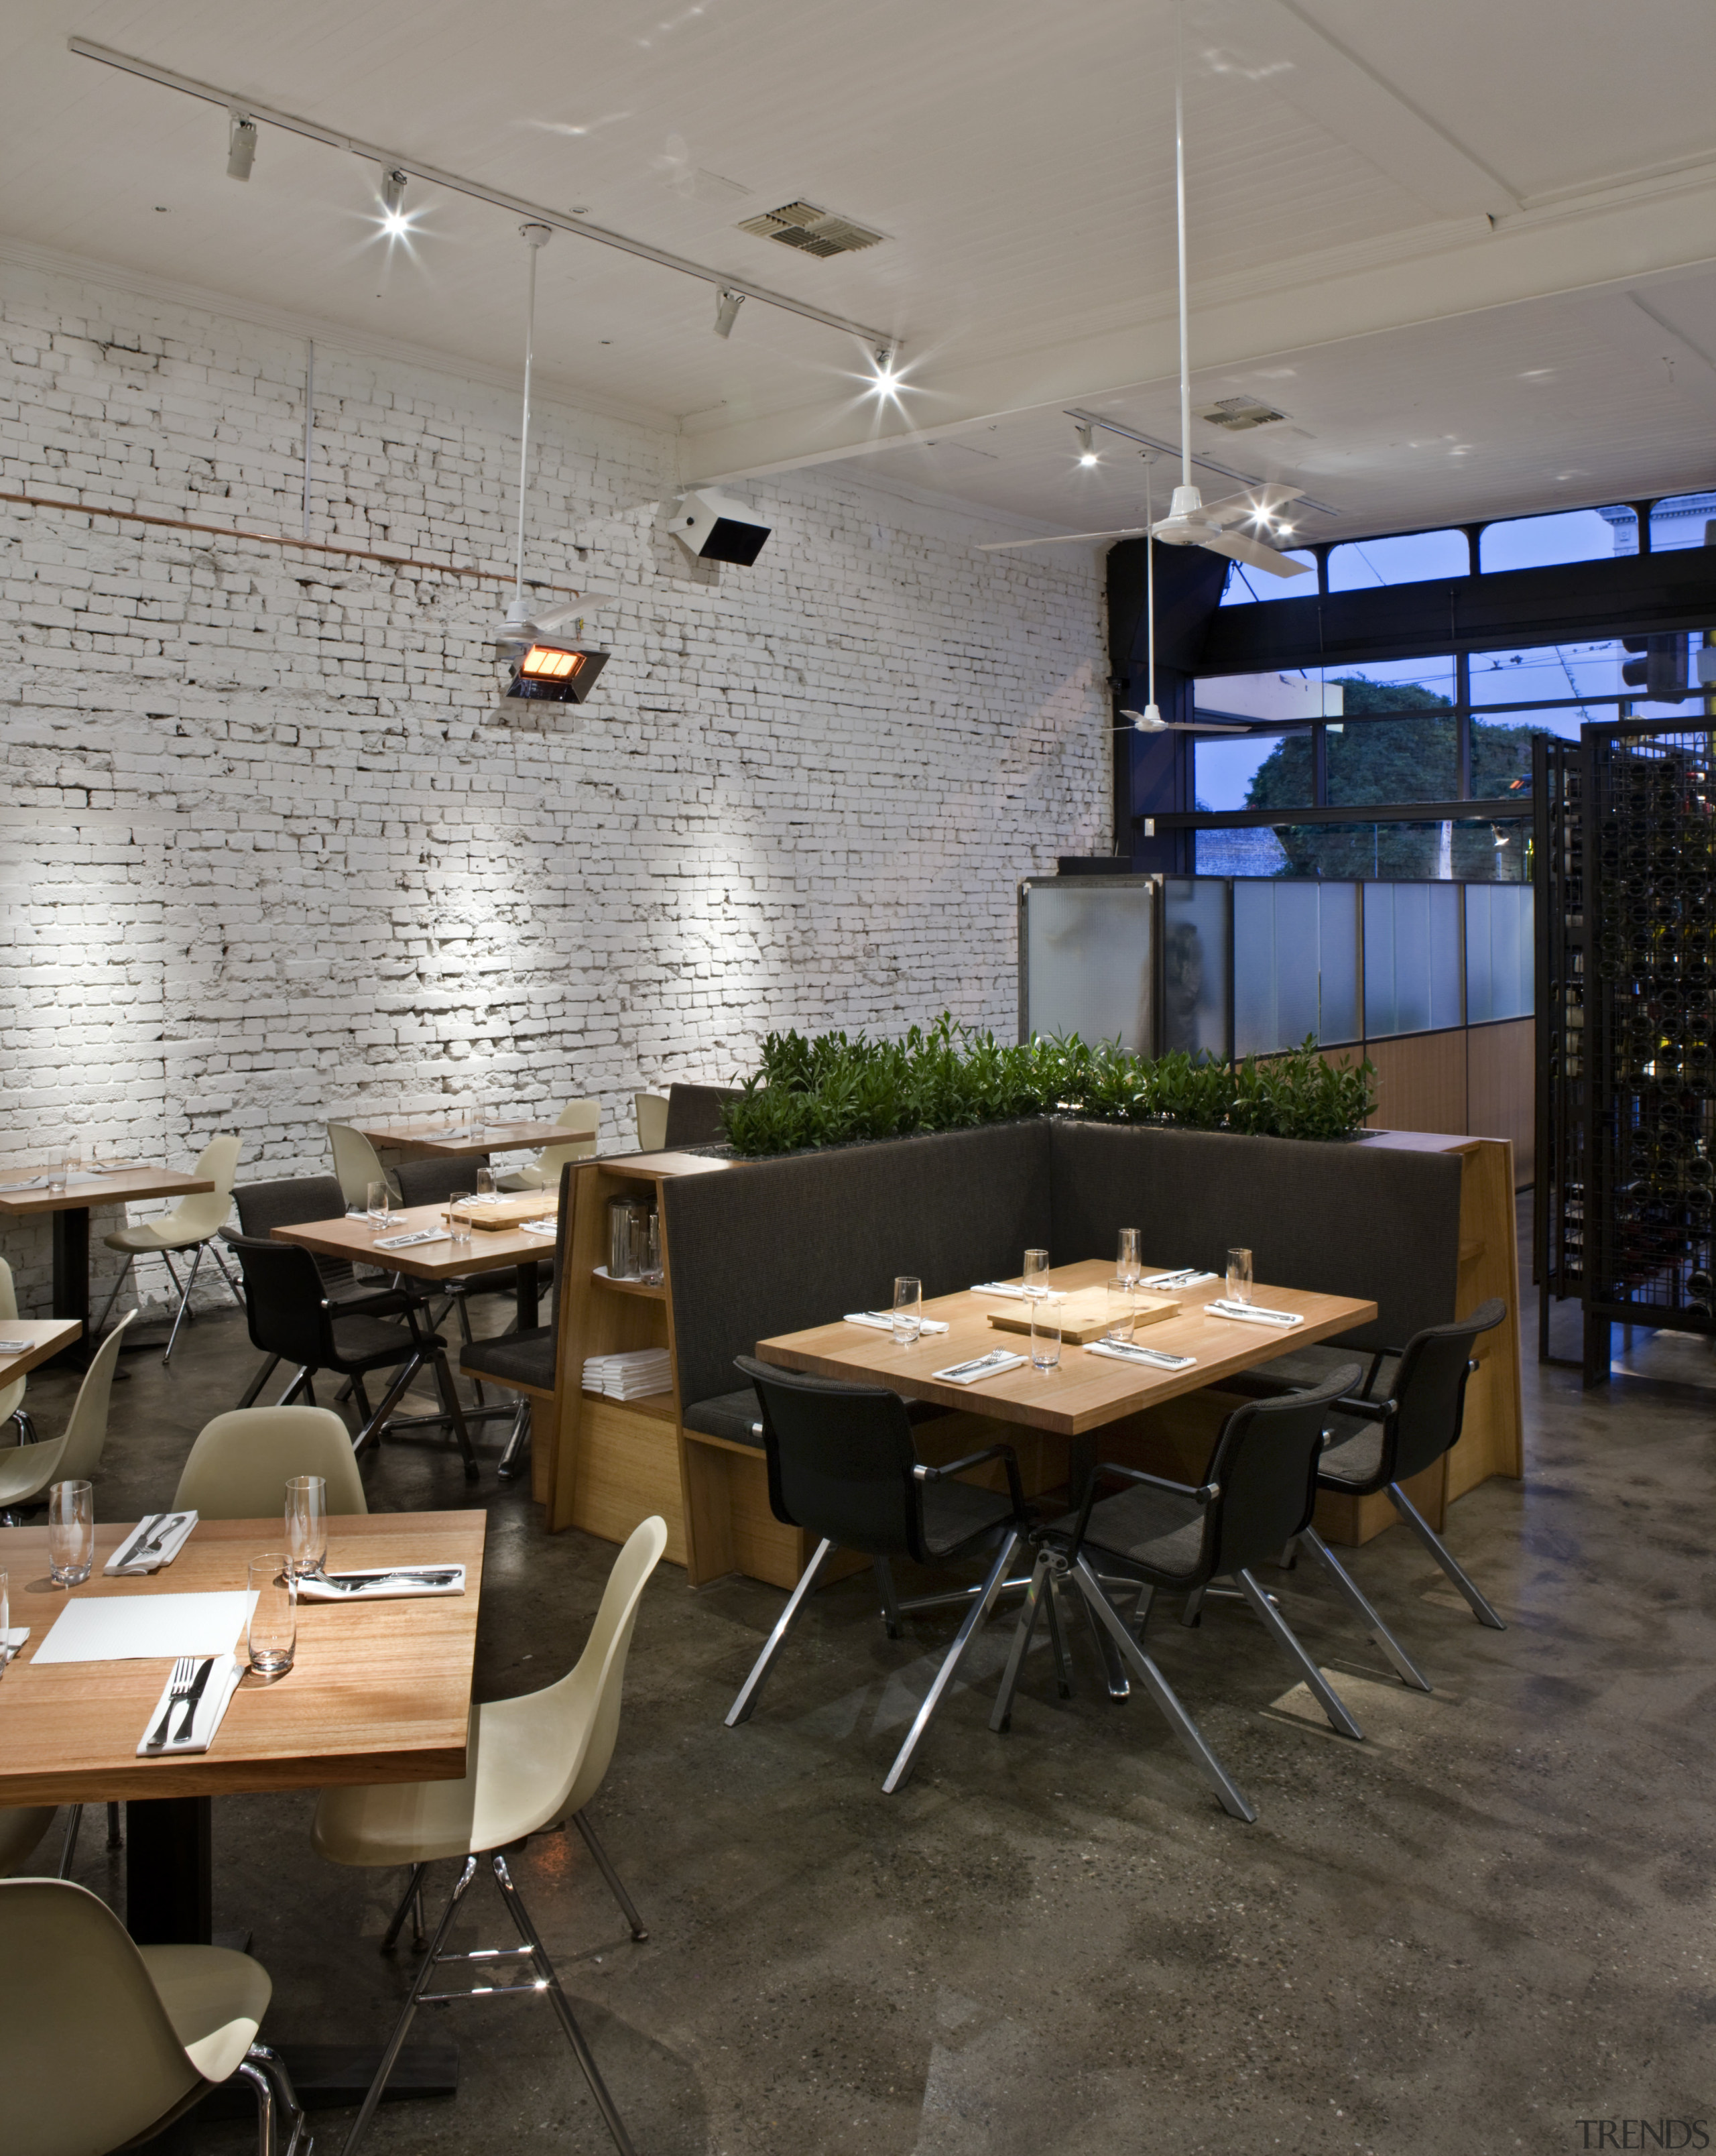 View of the cafe area at the St architecture, café, ceiling, furniture, interior design, restaurant, table, gray, black